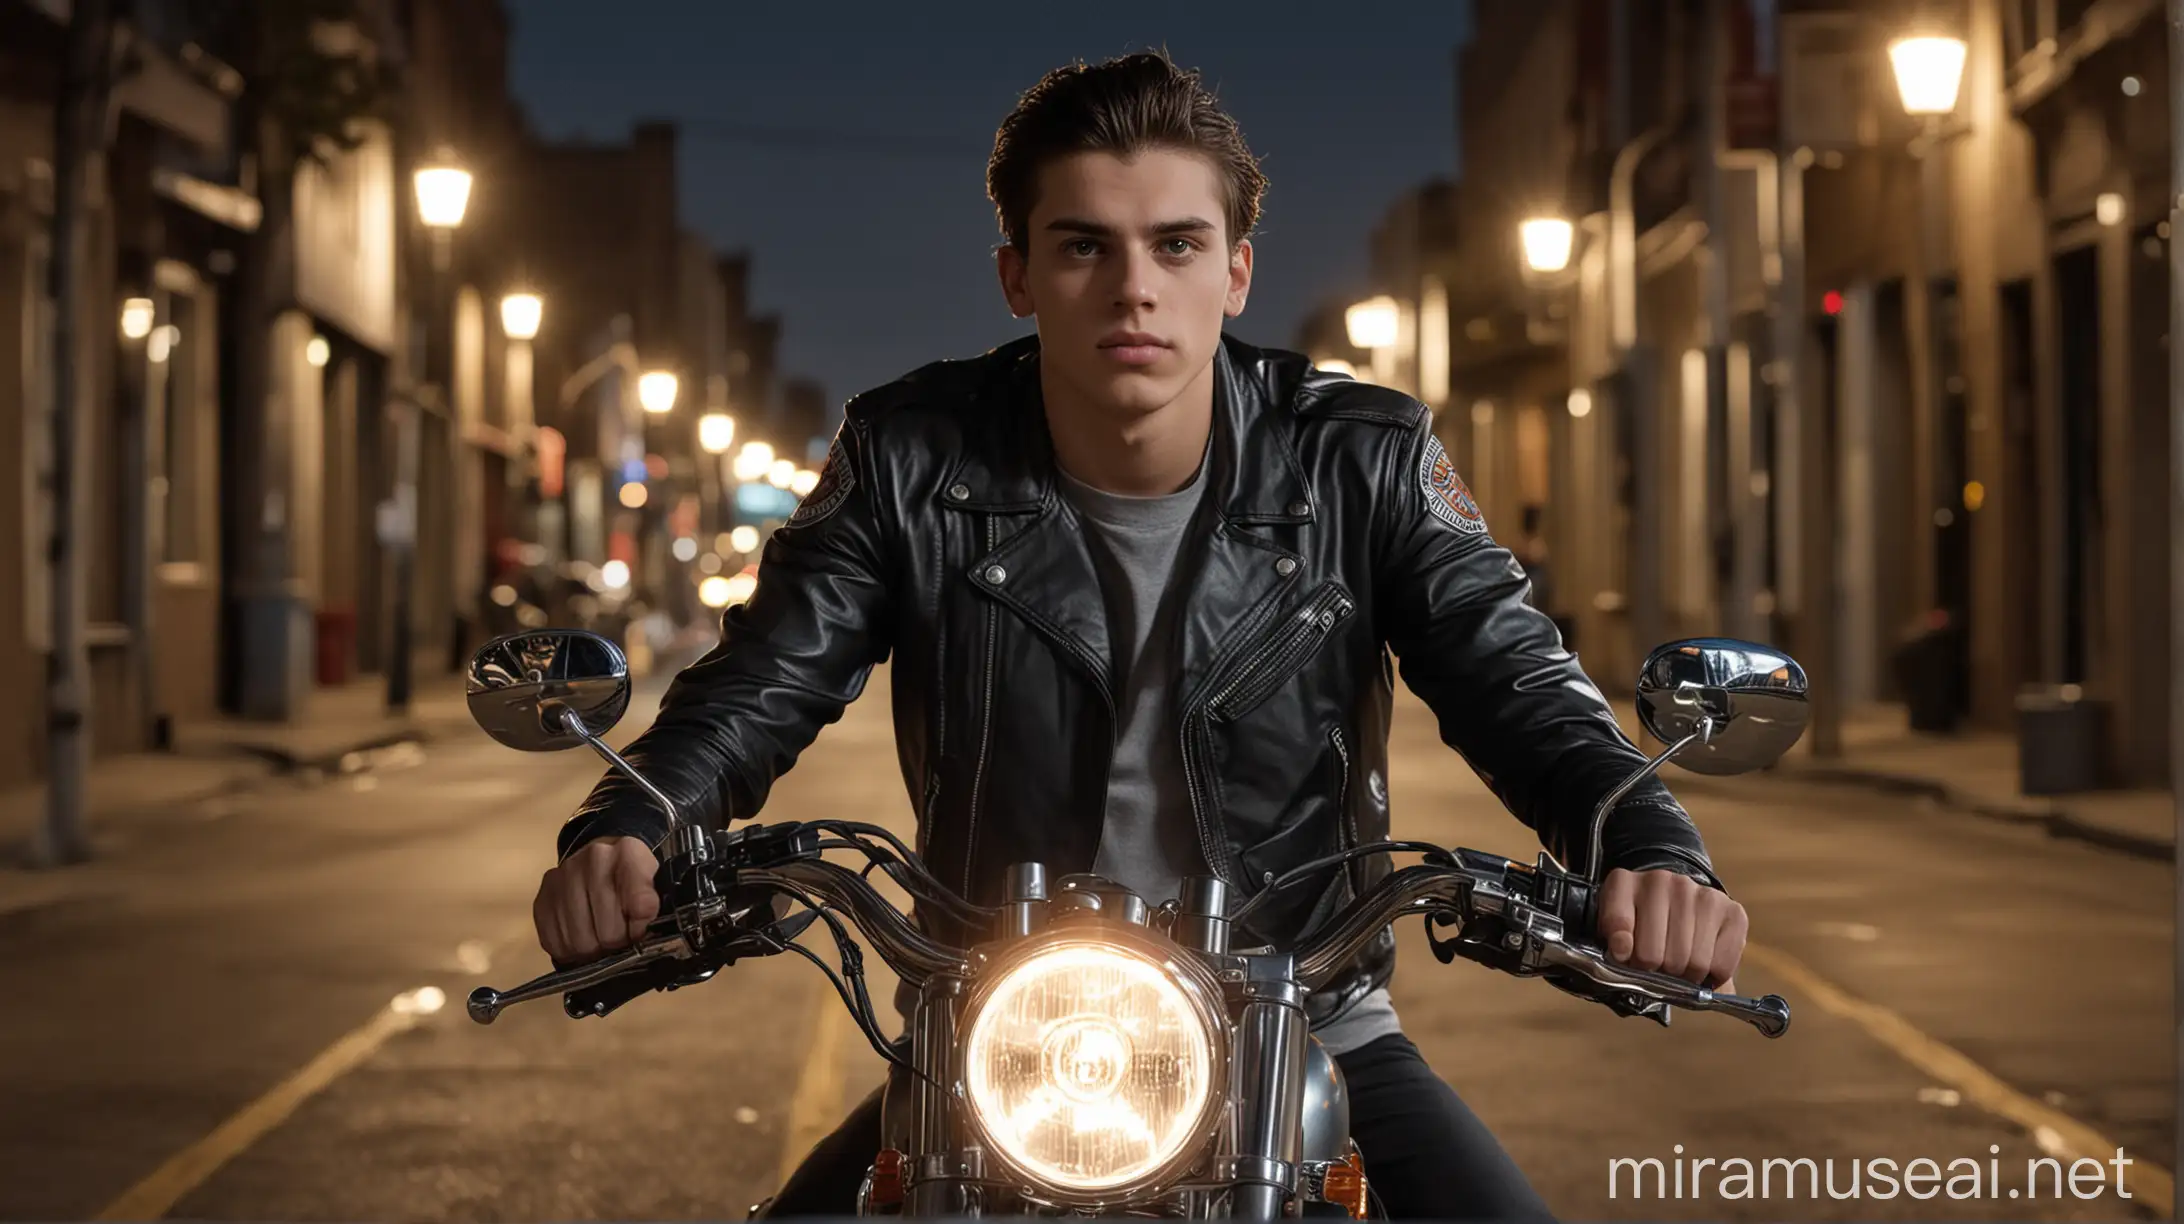 a young man wearing a black leather jacket and gray t-shirt riding a Harley Davidson motorbike facing the camera at night lit by street lights